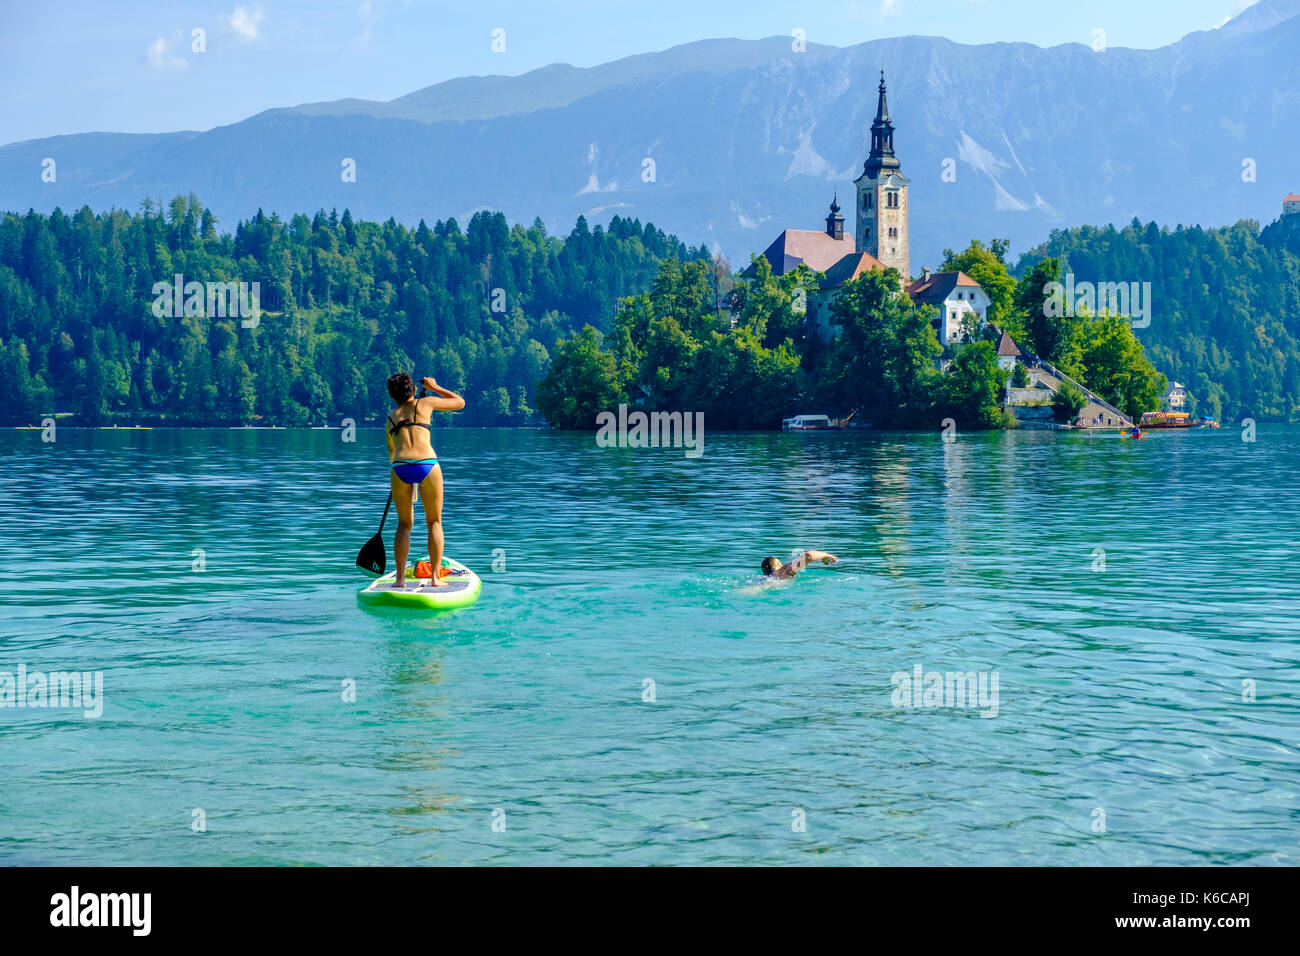 A young woman is stand up paddling on Lake Bled, Blejsko jezero, another woman is swimming next to her towards Bled Island, Blejski otok Stock Photo